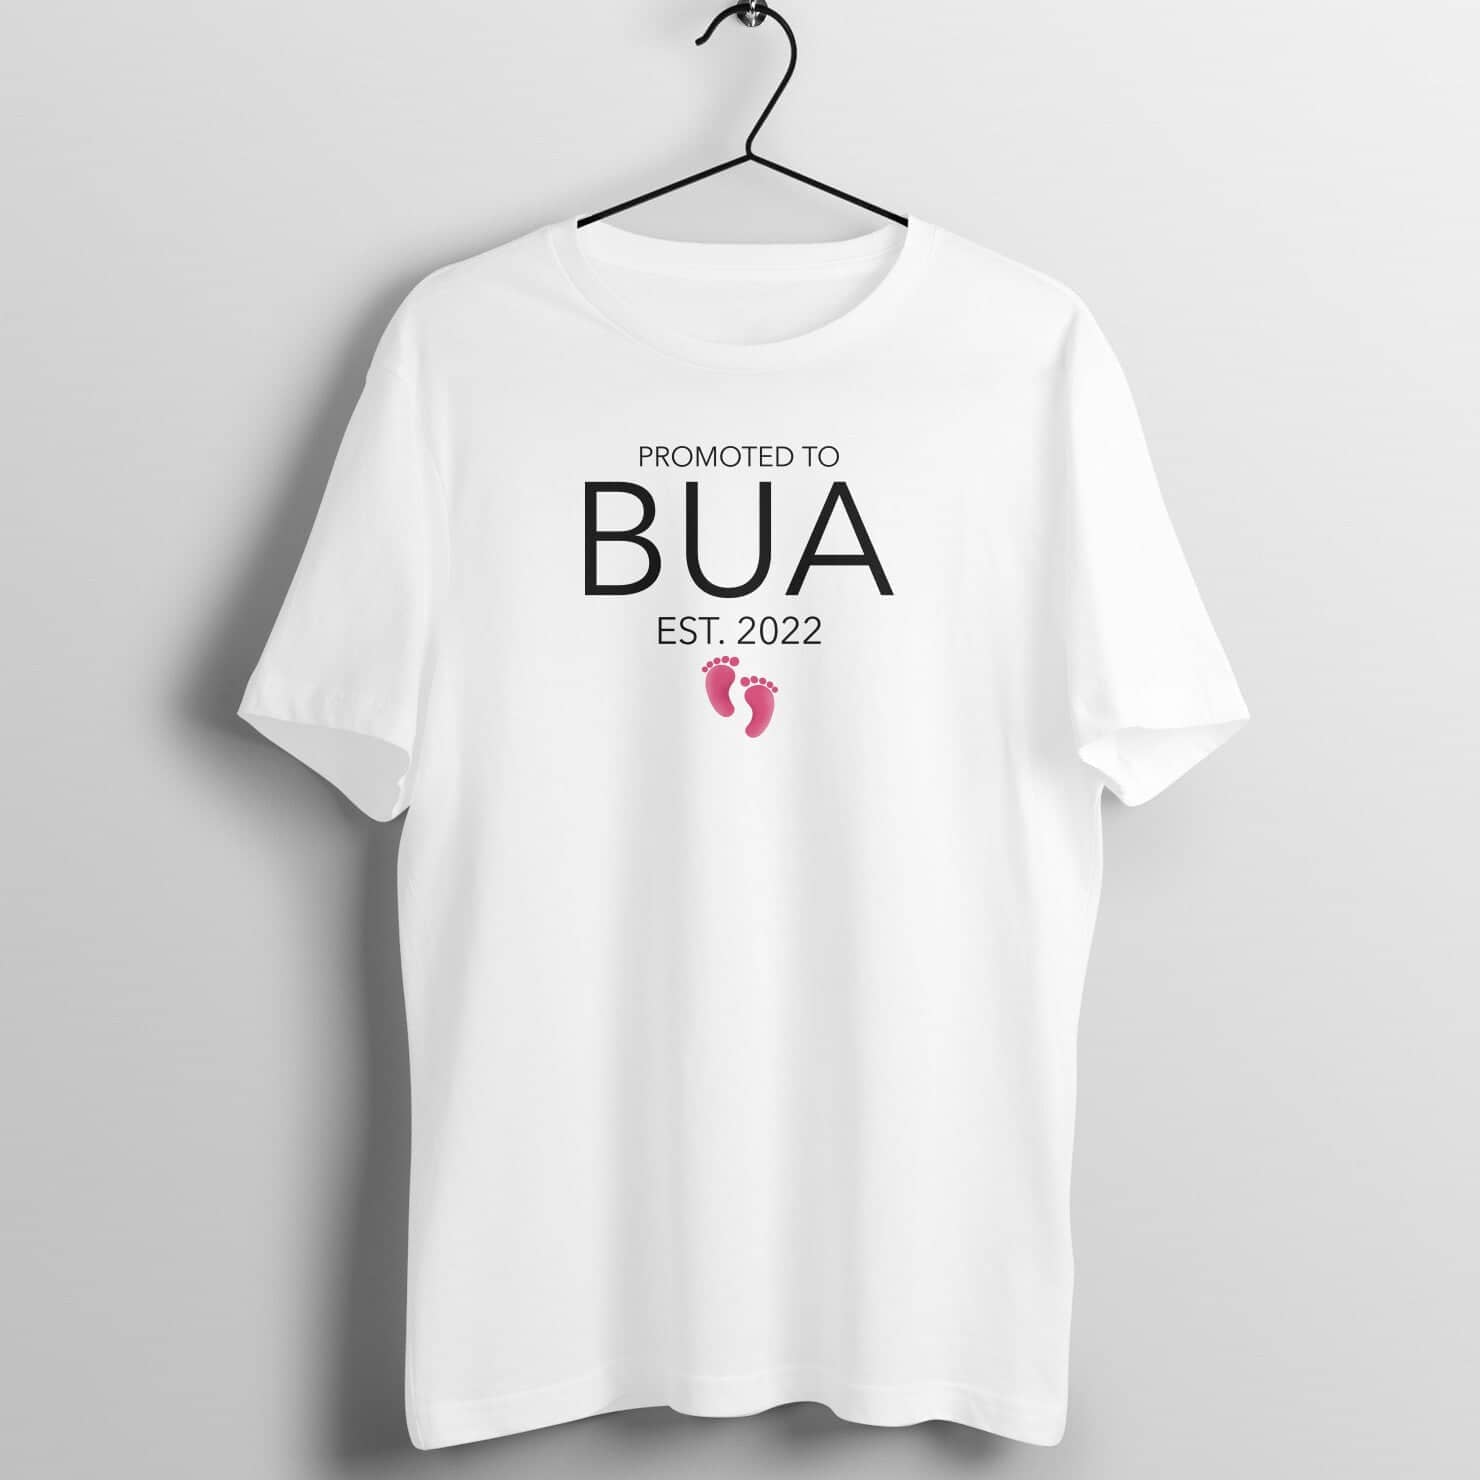 Promoted to Bua Est. 2022 Special White T Shirt for Women Shirts & Tops Printrove White S 